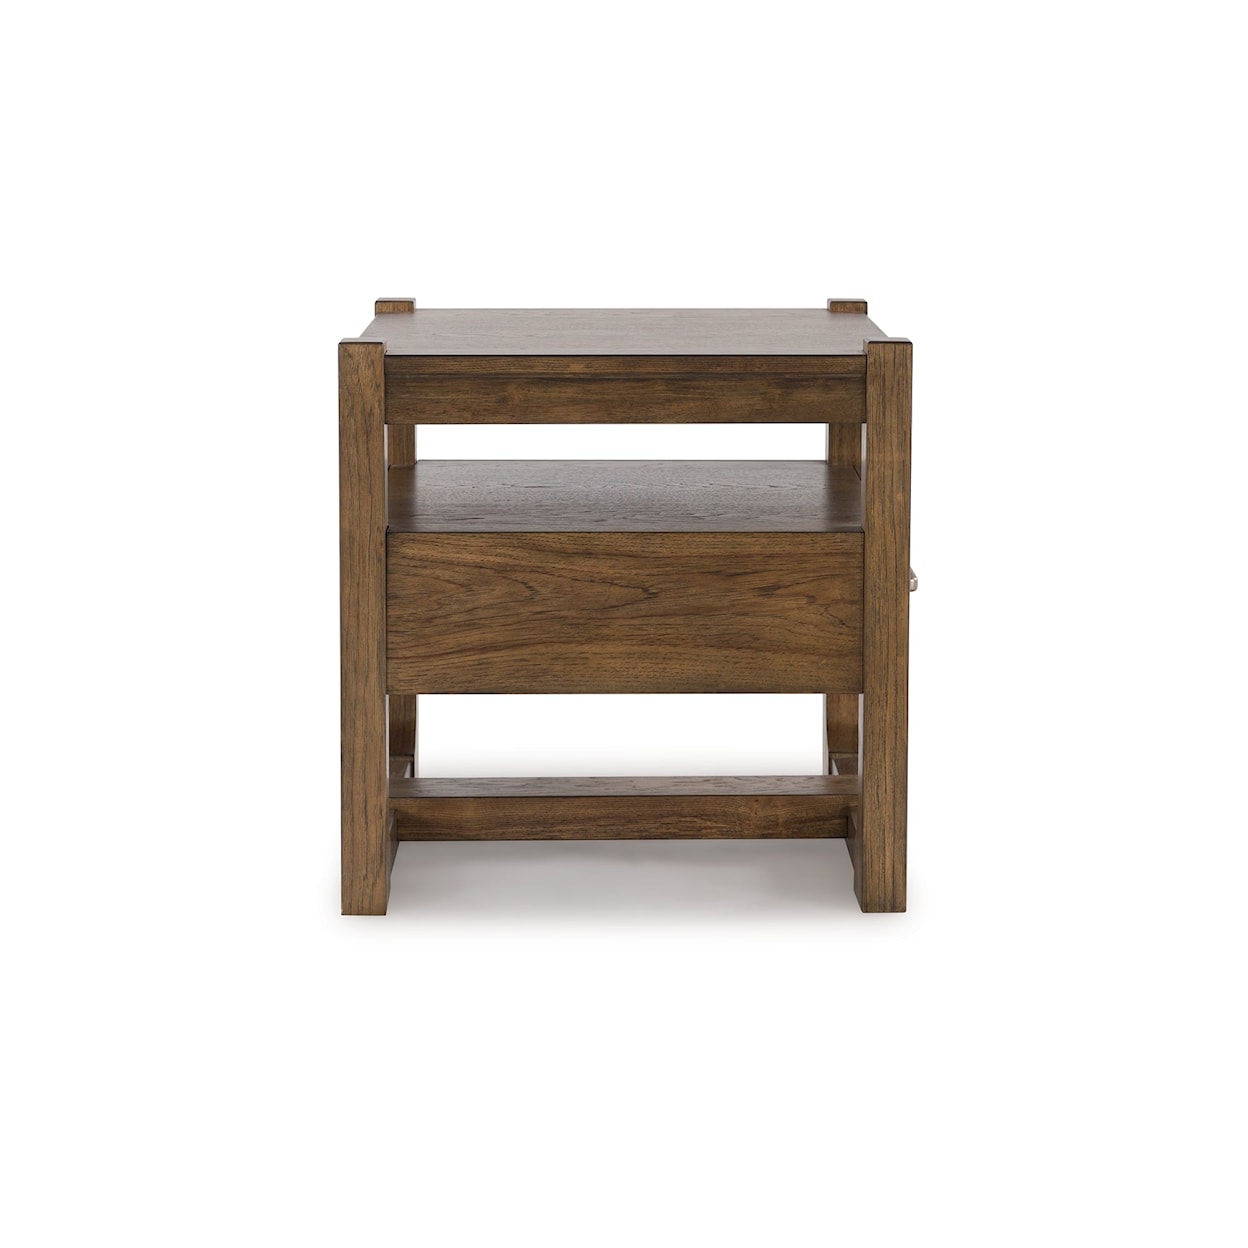 Benchcraft Cabalynn Square End Table